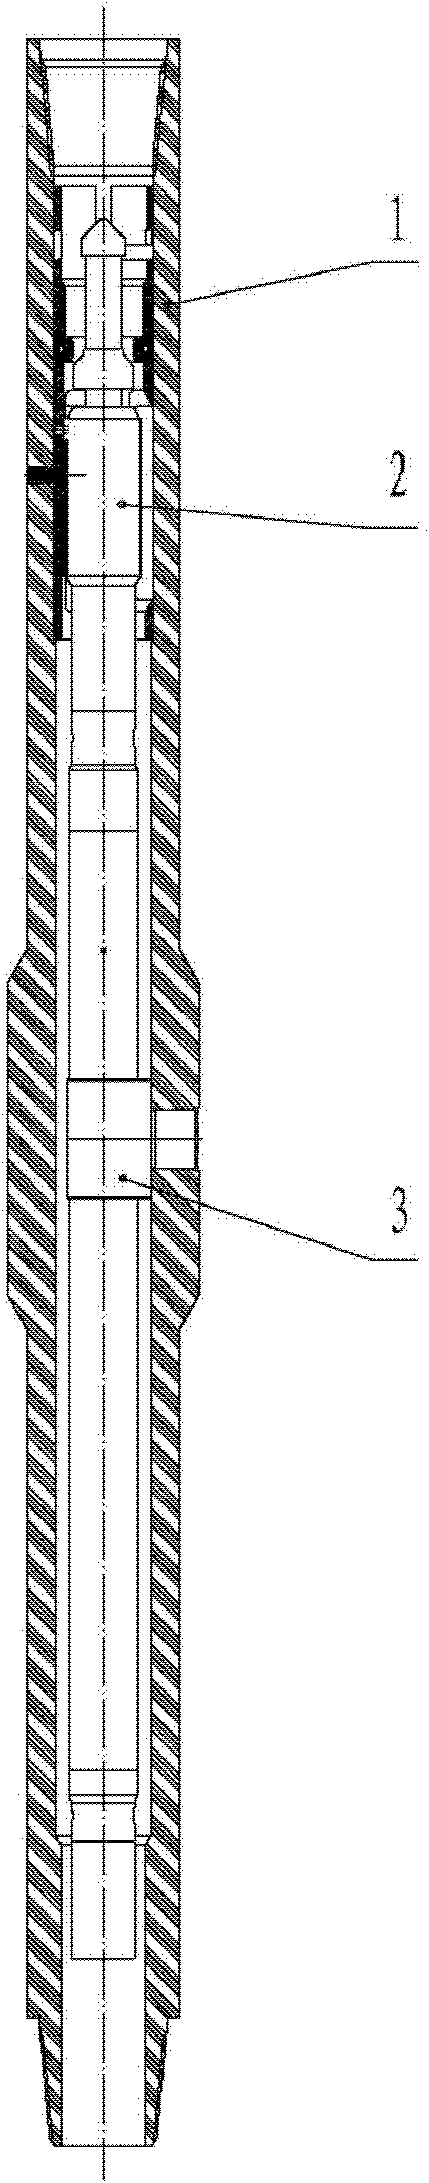 Formation pressure measuring device while drilling